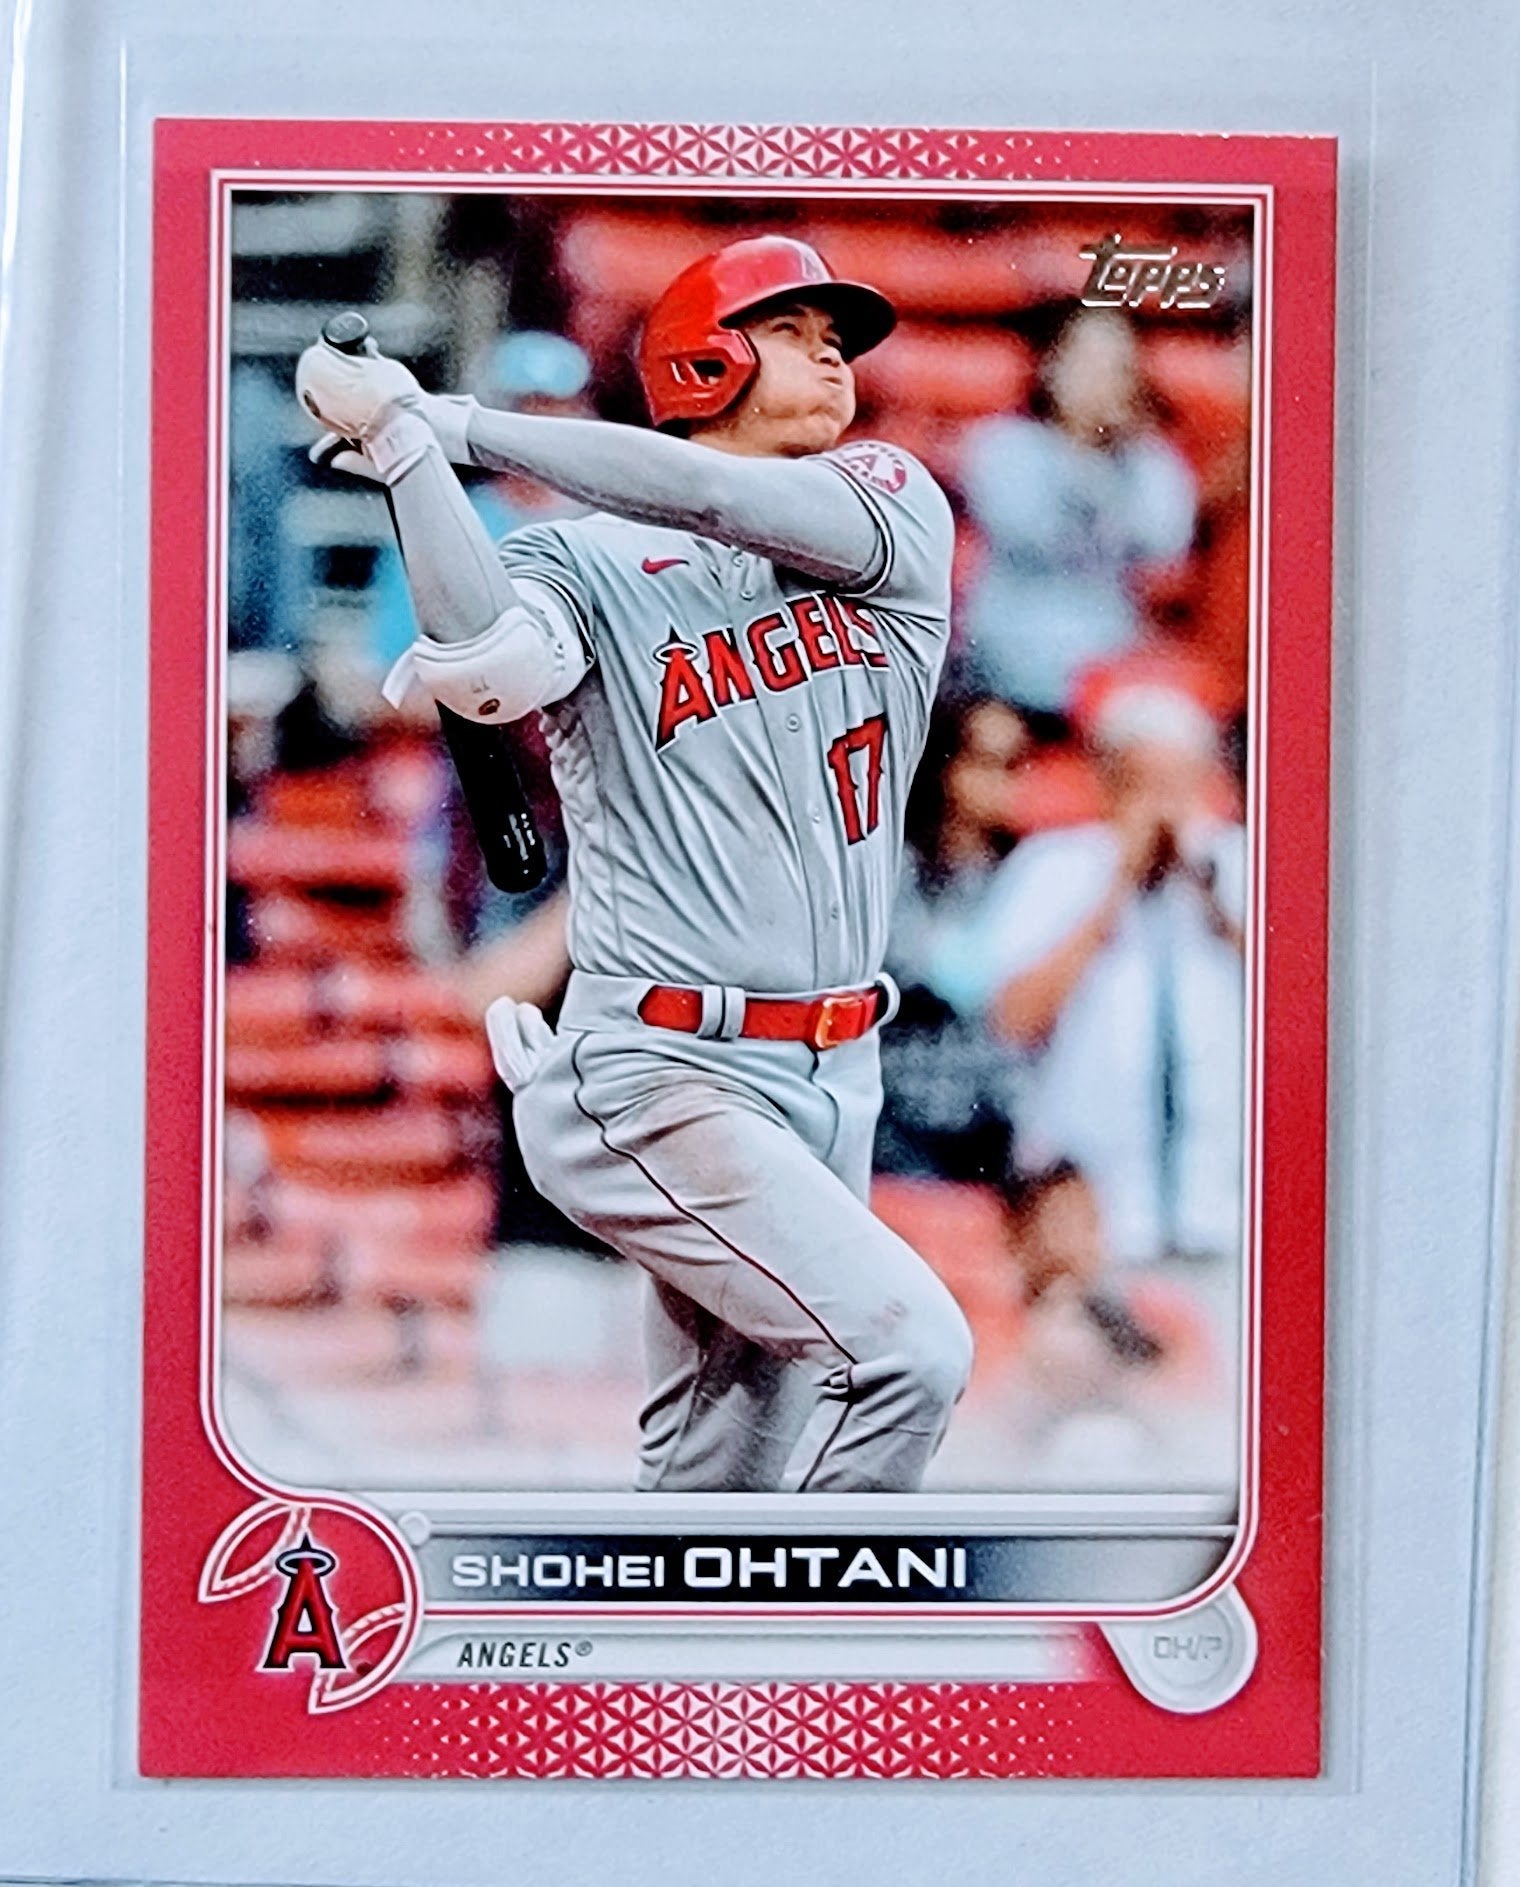 2022 Topps Shohei Ohtani Red Bordered #'d/50 Baseball Card simple Xclusive Collectibles   